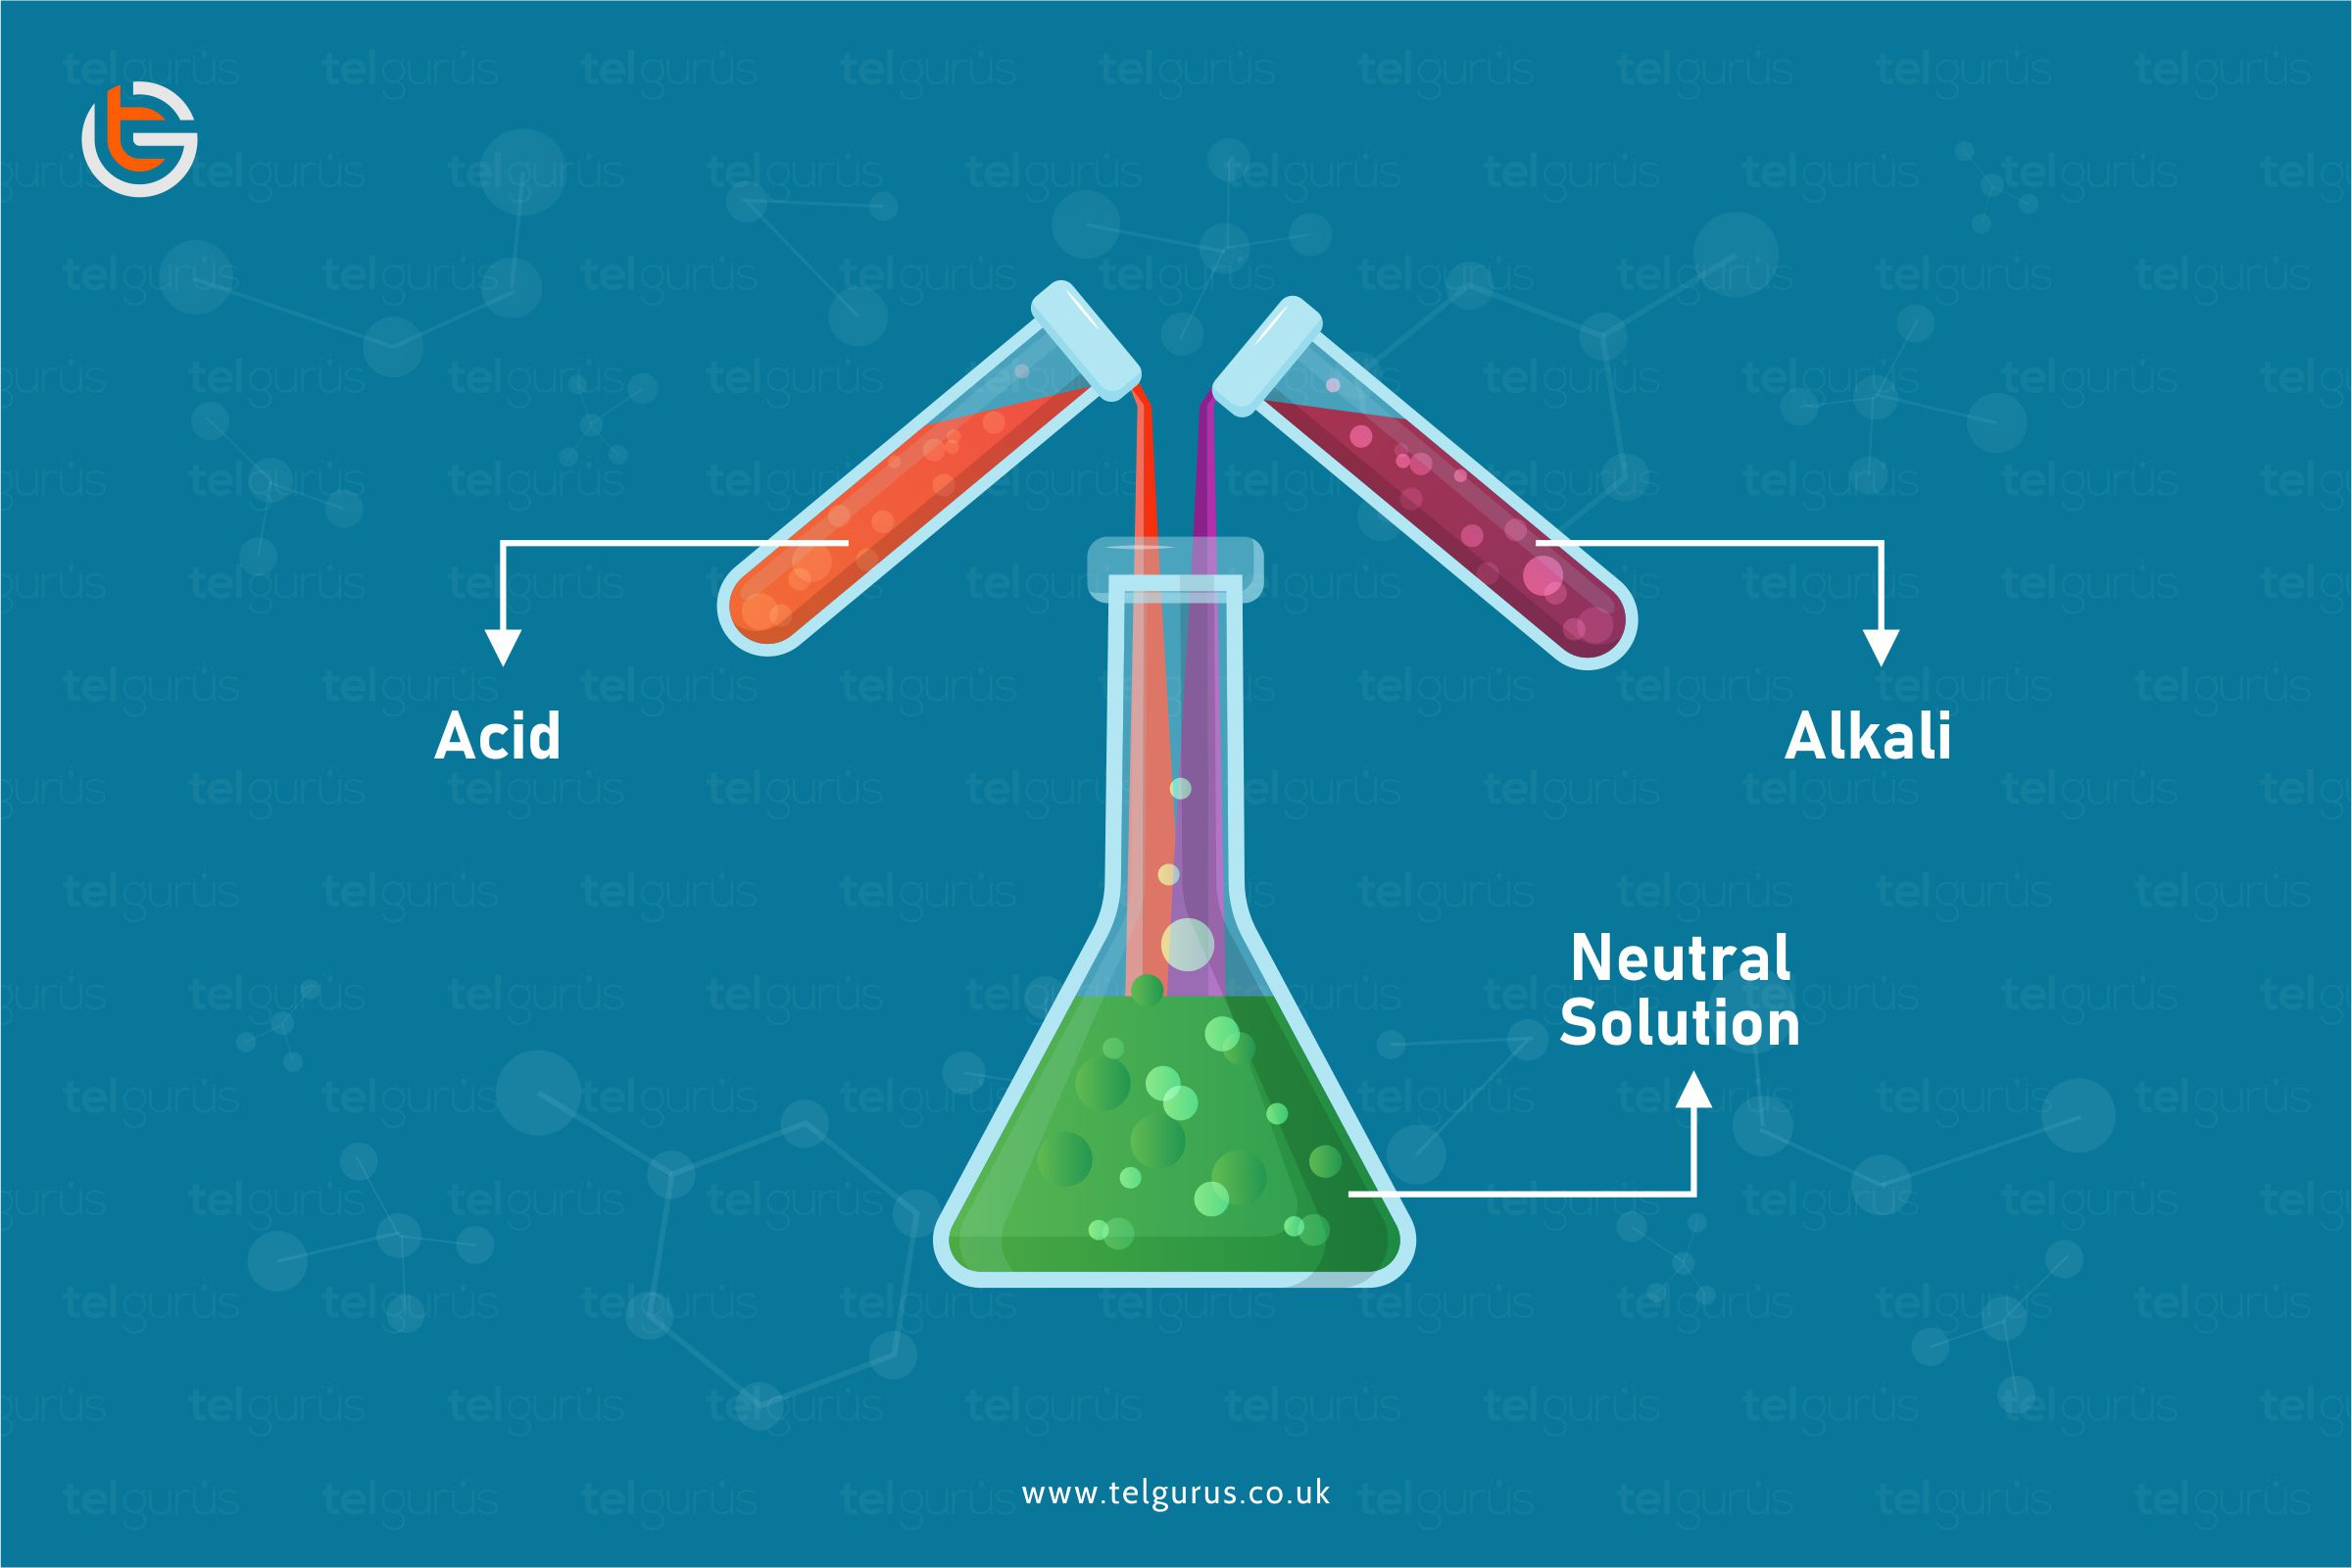 Explain what occurs when an acid reacts with an alkali in terms of ions and molecules. Also, show the equation.